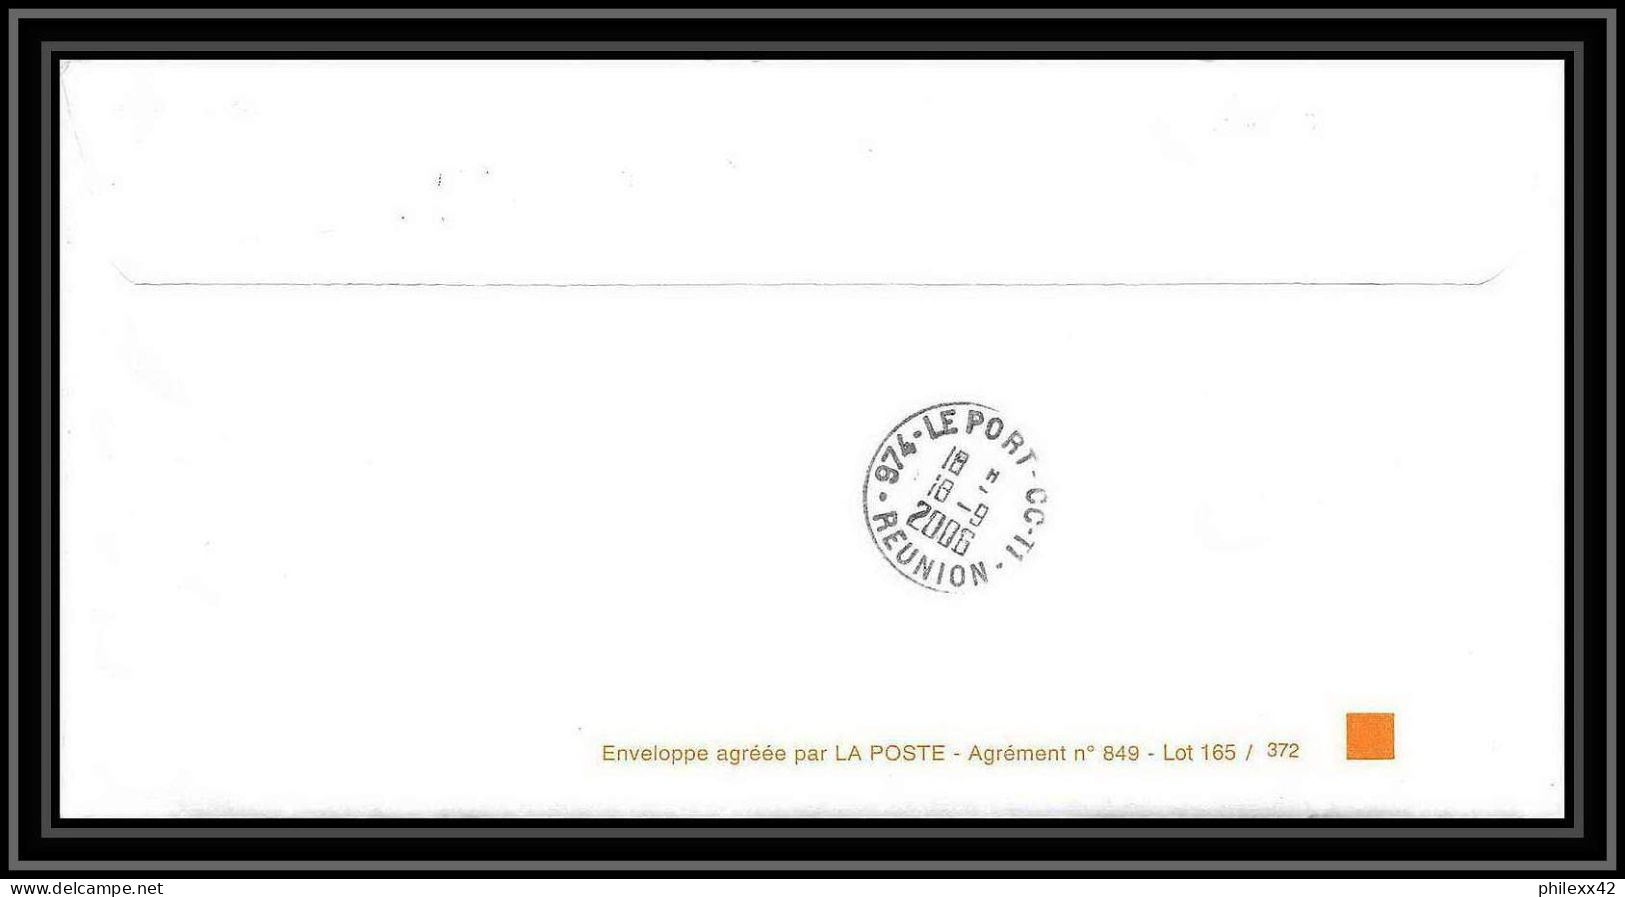 2602 ANTARCTIC Terres Australes TAAF Lettre Cover Dufresne 2 Signé Signed Op 2006/2 N°433 6/9/2006 - Antarktis-Expeditionen